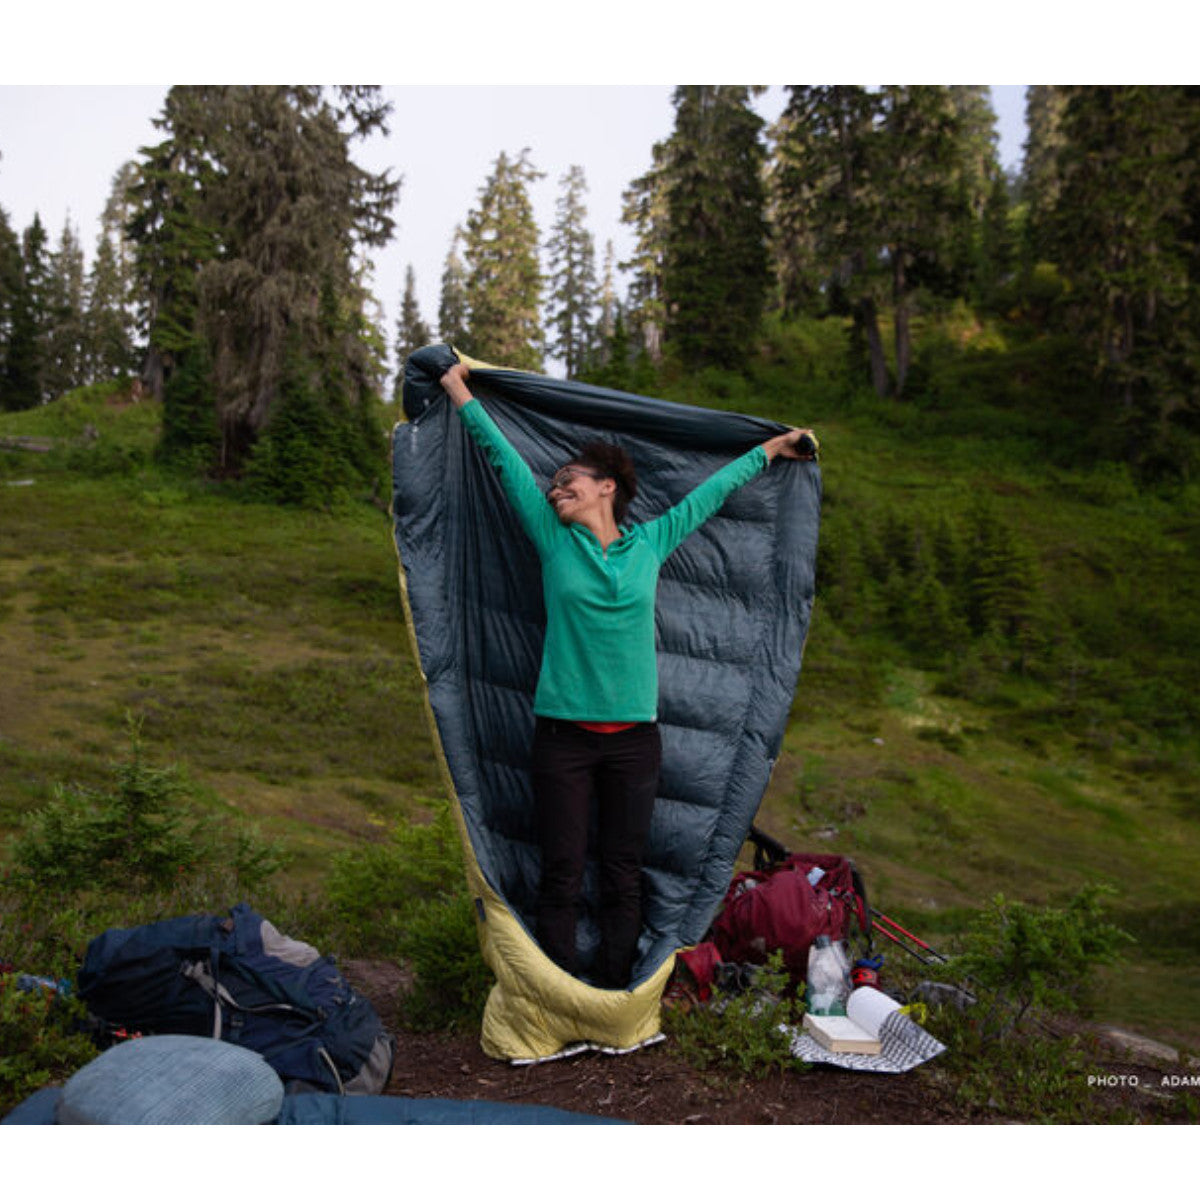 Thermarest Corus 20F/-6C Quilt in golden colour showing person holding it in air